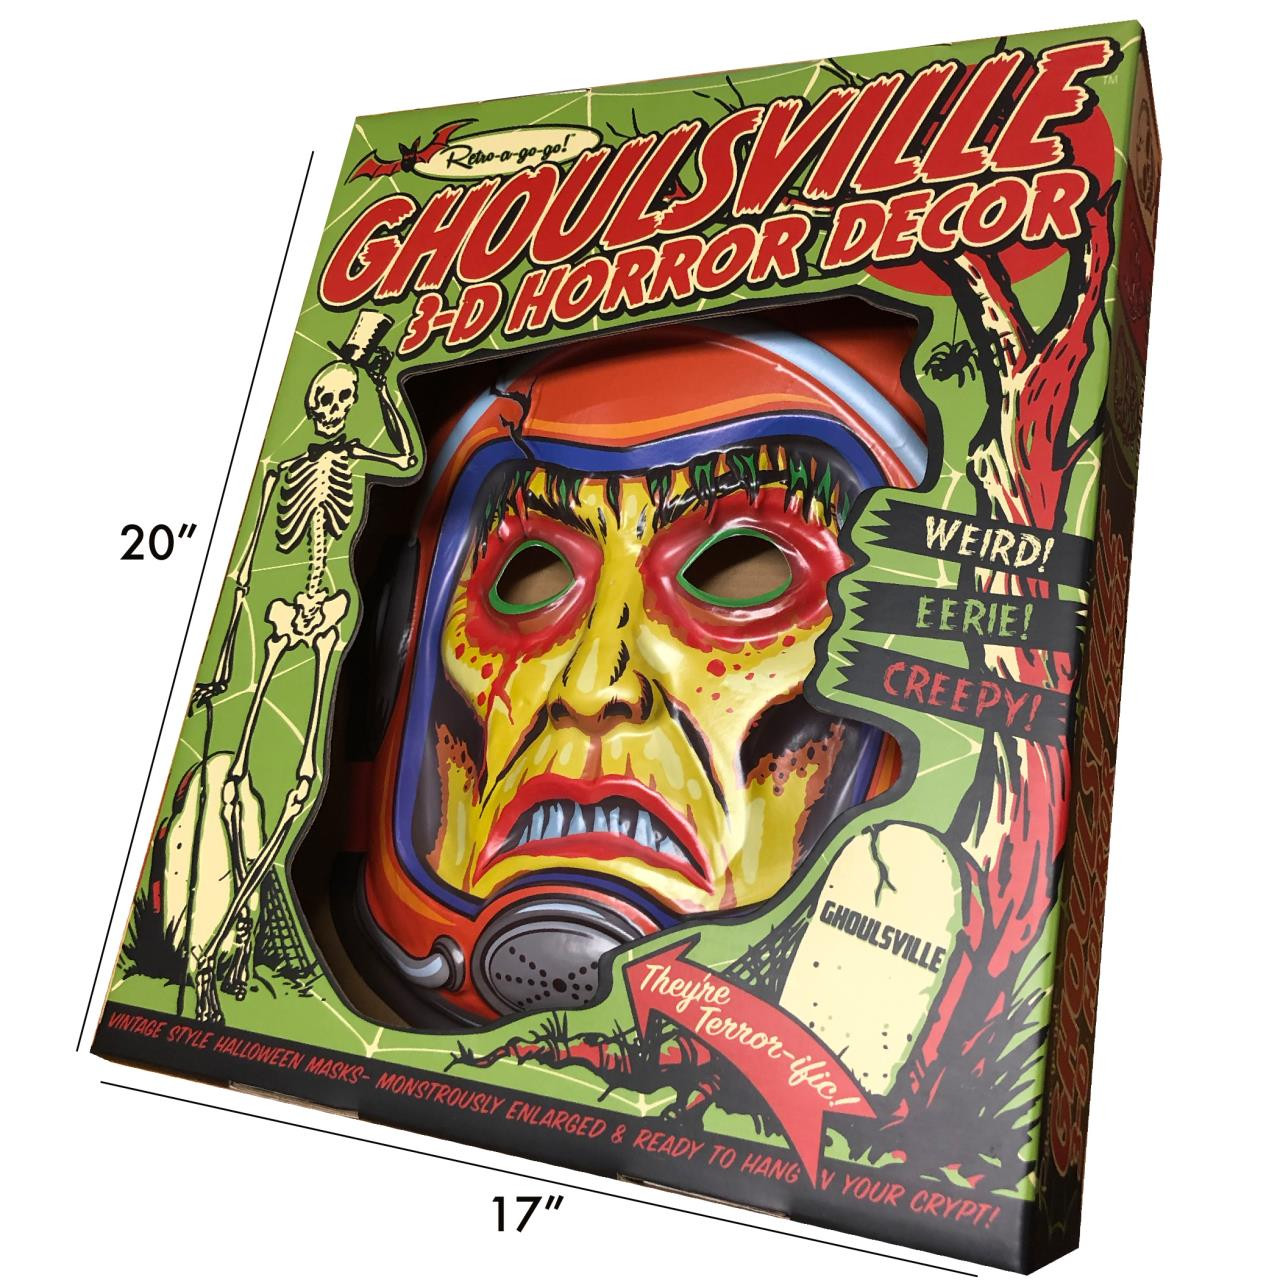 Space Zombie 2001 3-D Wall Decor* -